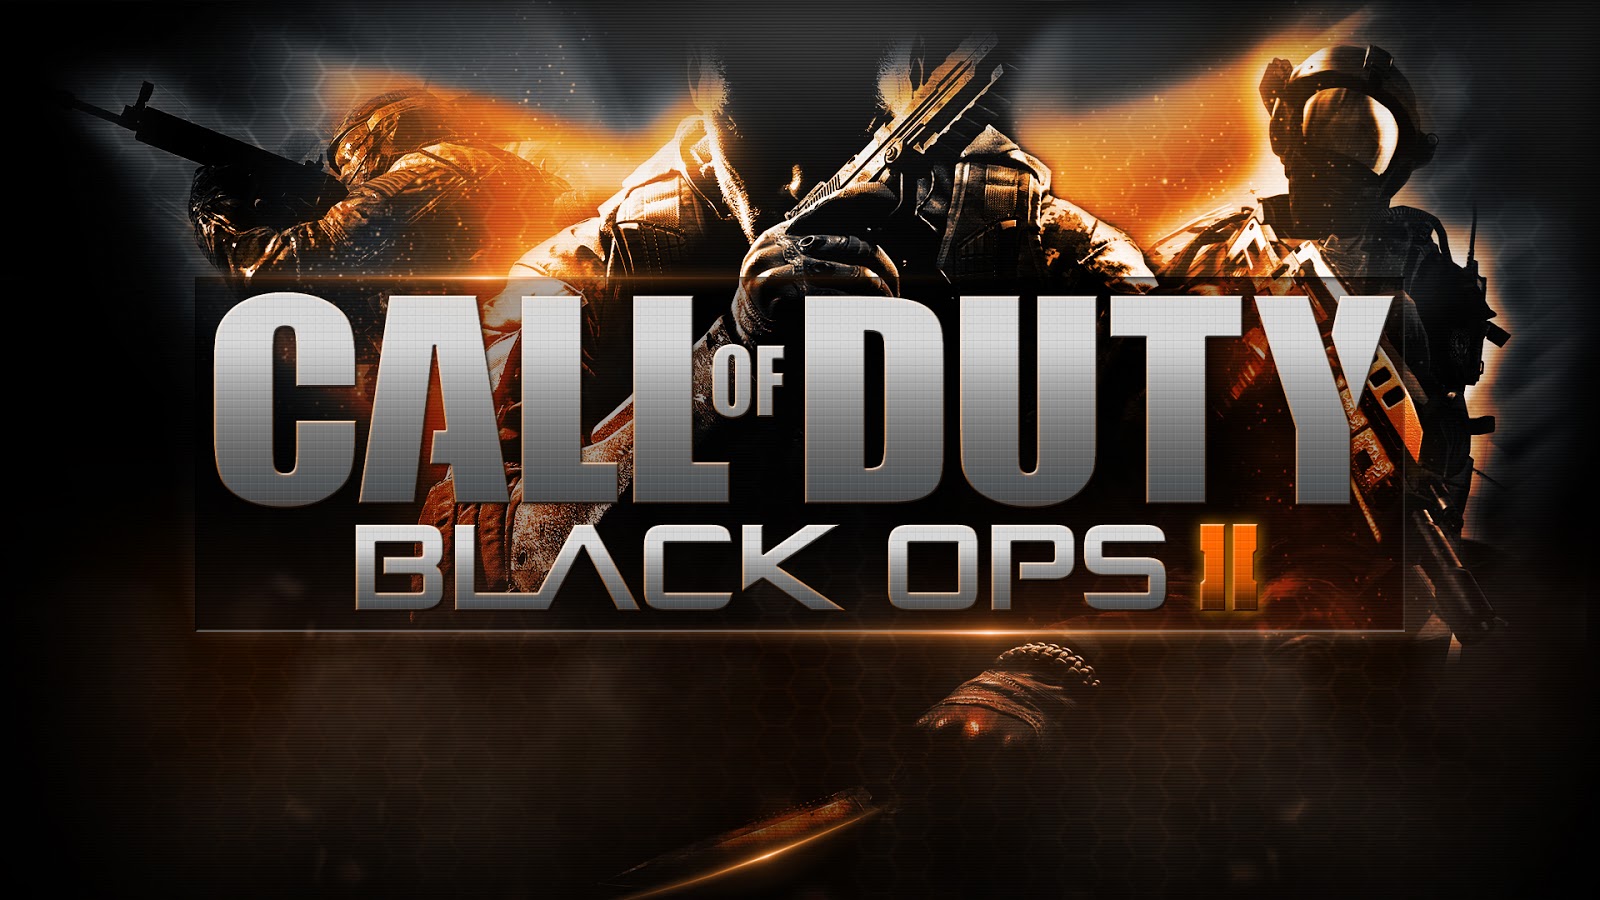 bo2 wallpaper,action adventure game,movie,games,pc game,action film